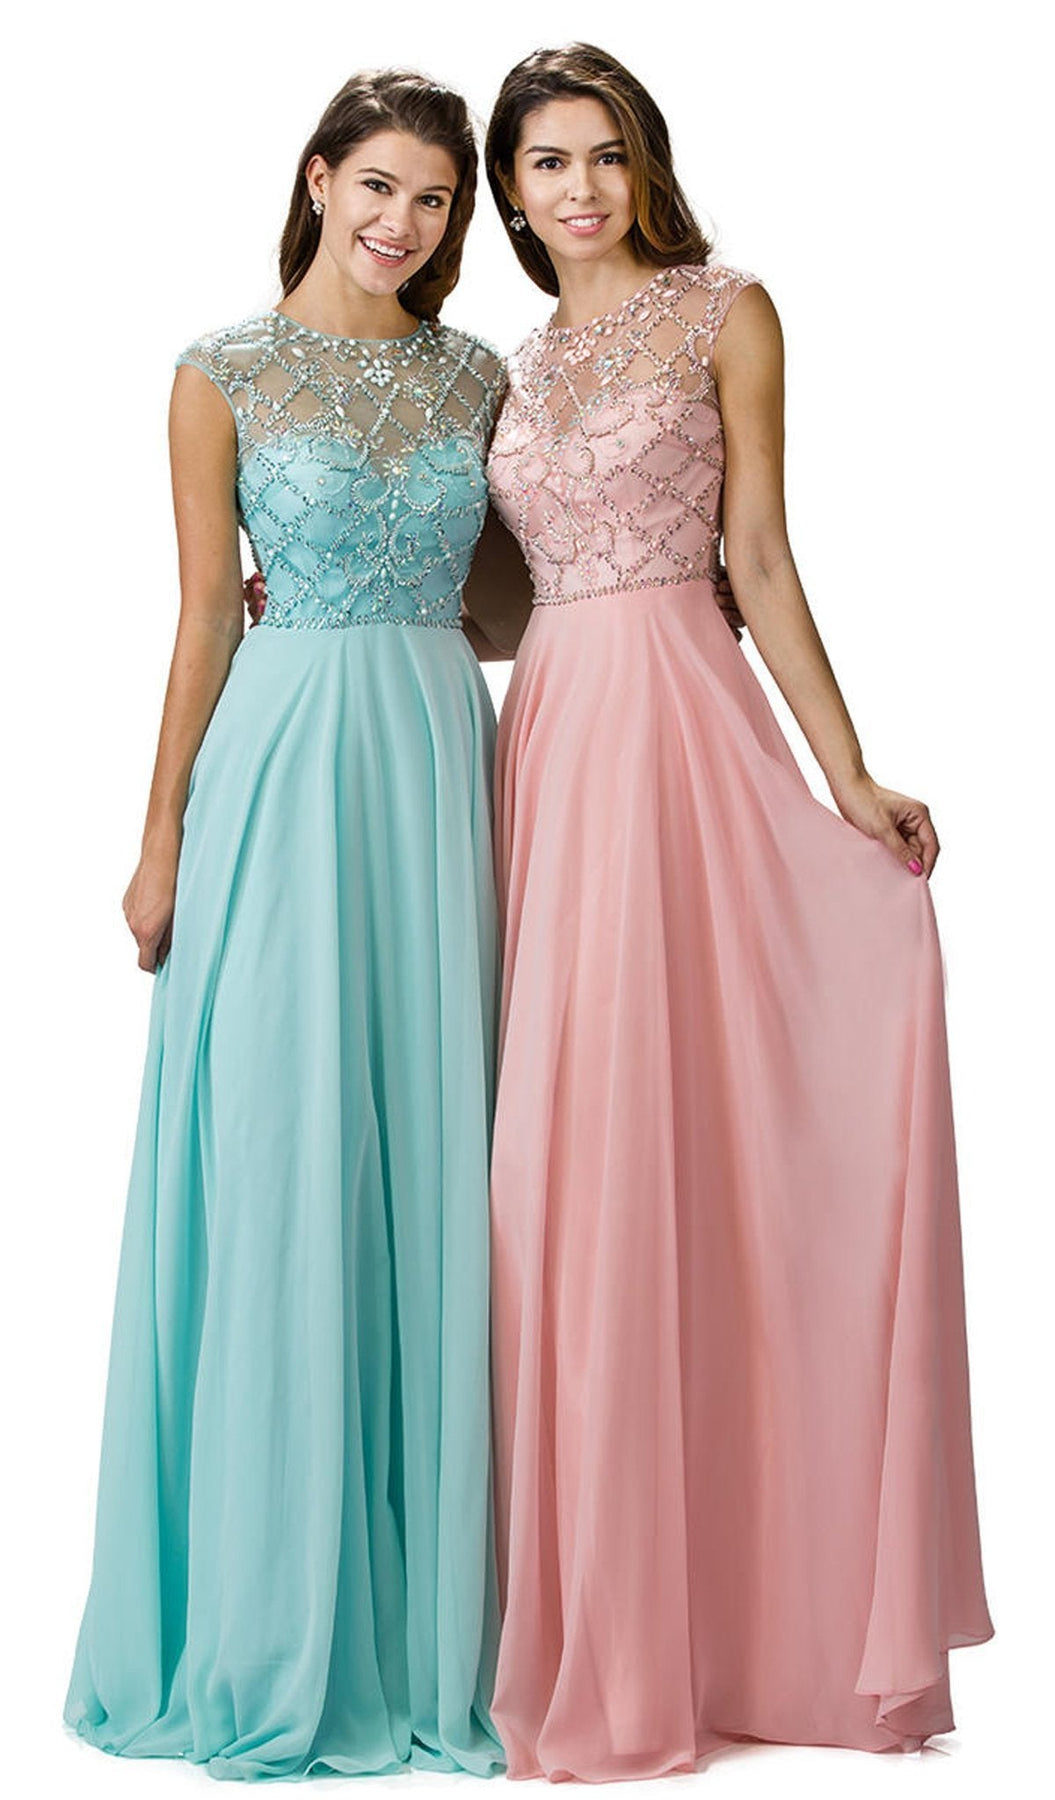 Dancing Queen - 9279 Embellished Sheer Bodice Cap-Sleeve Prom Dress Special Occasion Dress XS / Blush